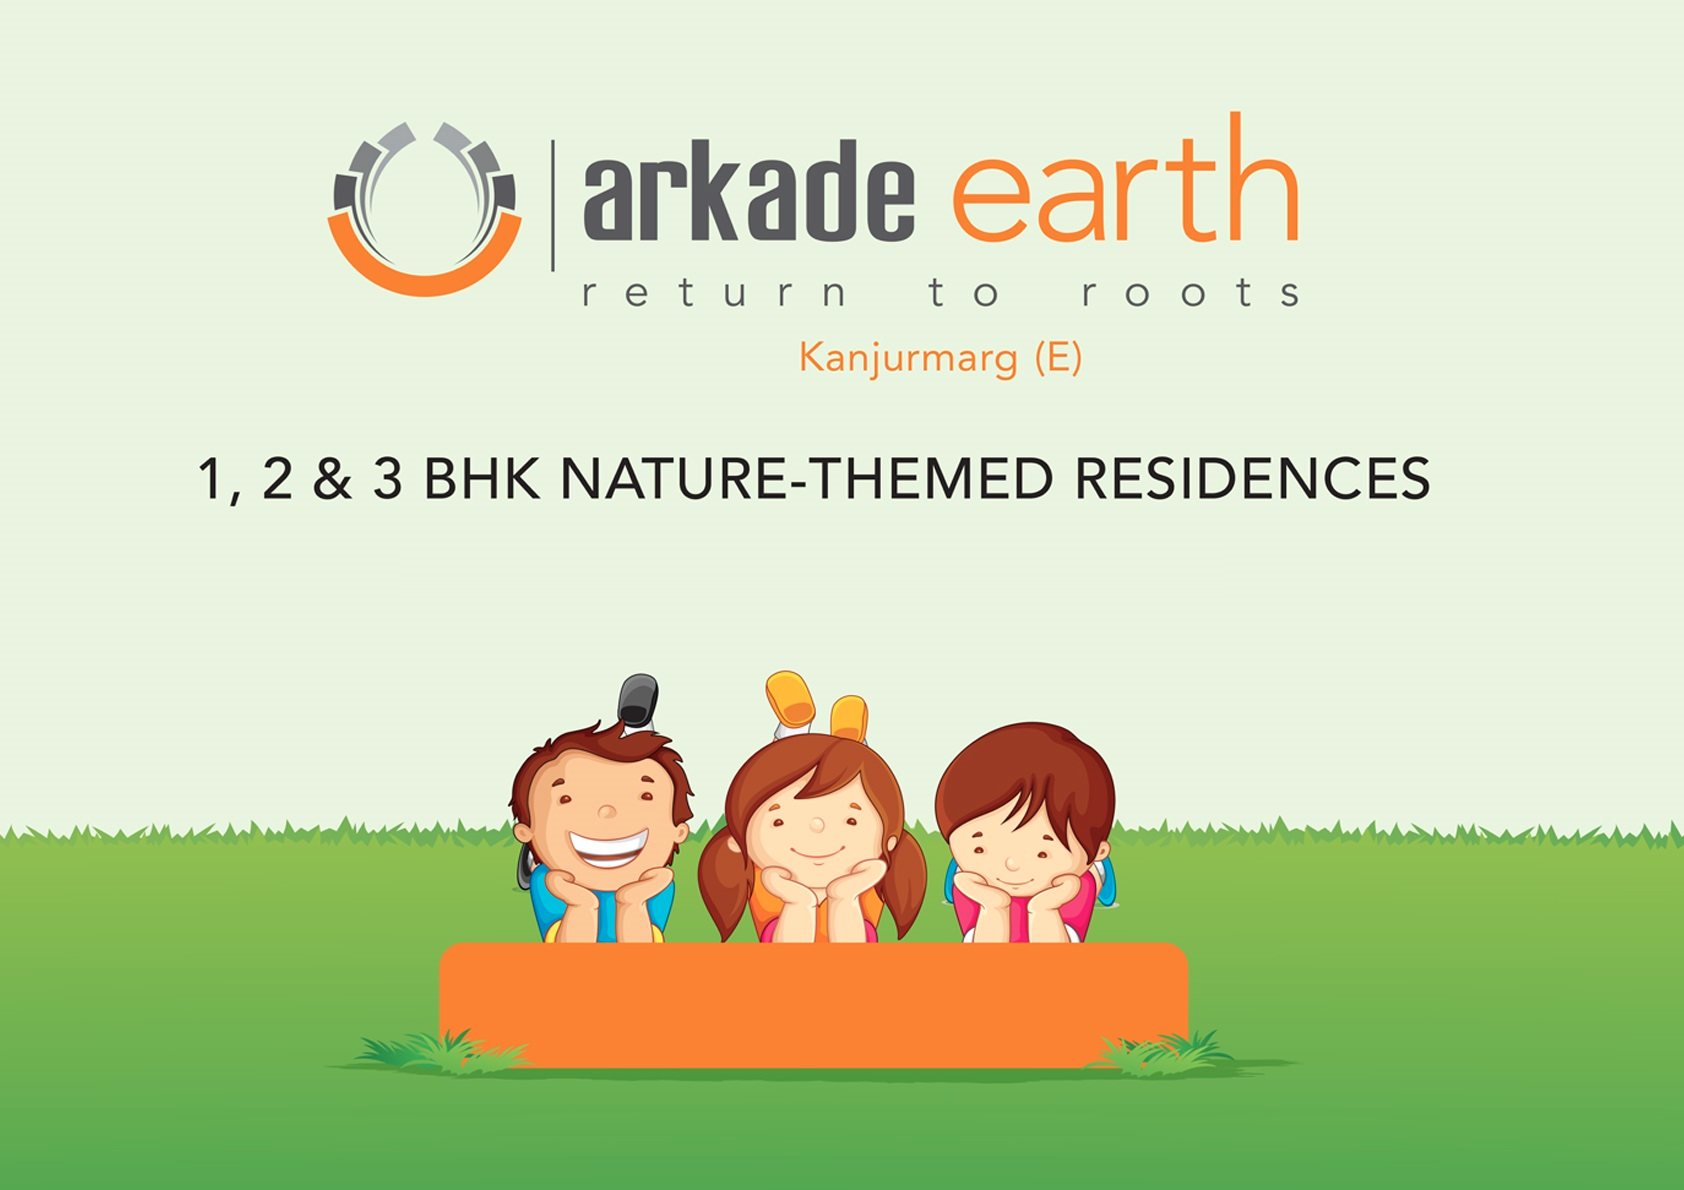 Arkade Earth presents nature theme based residencies in township